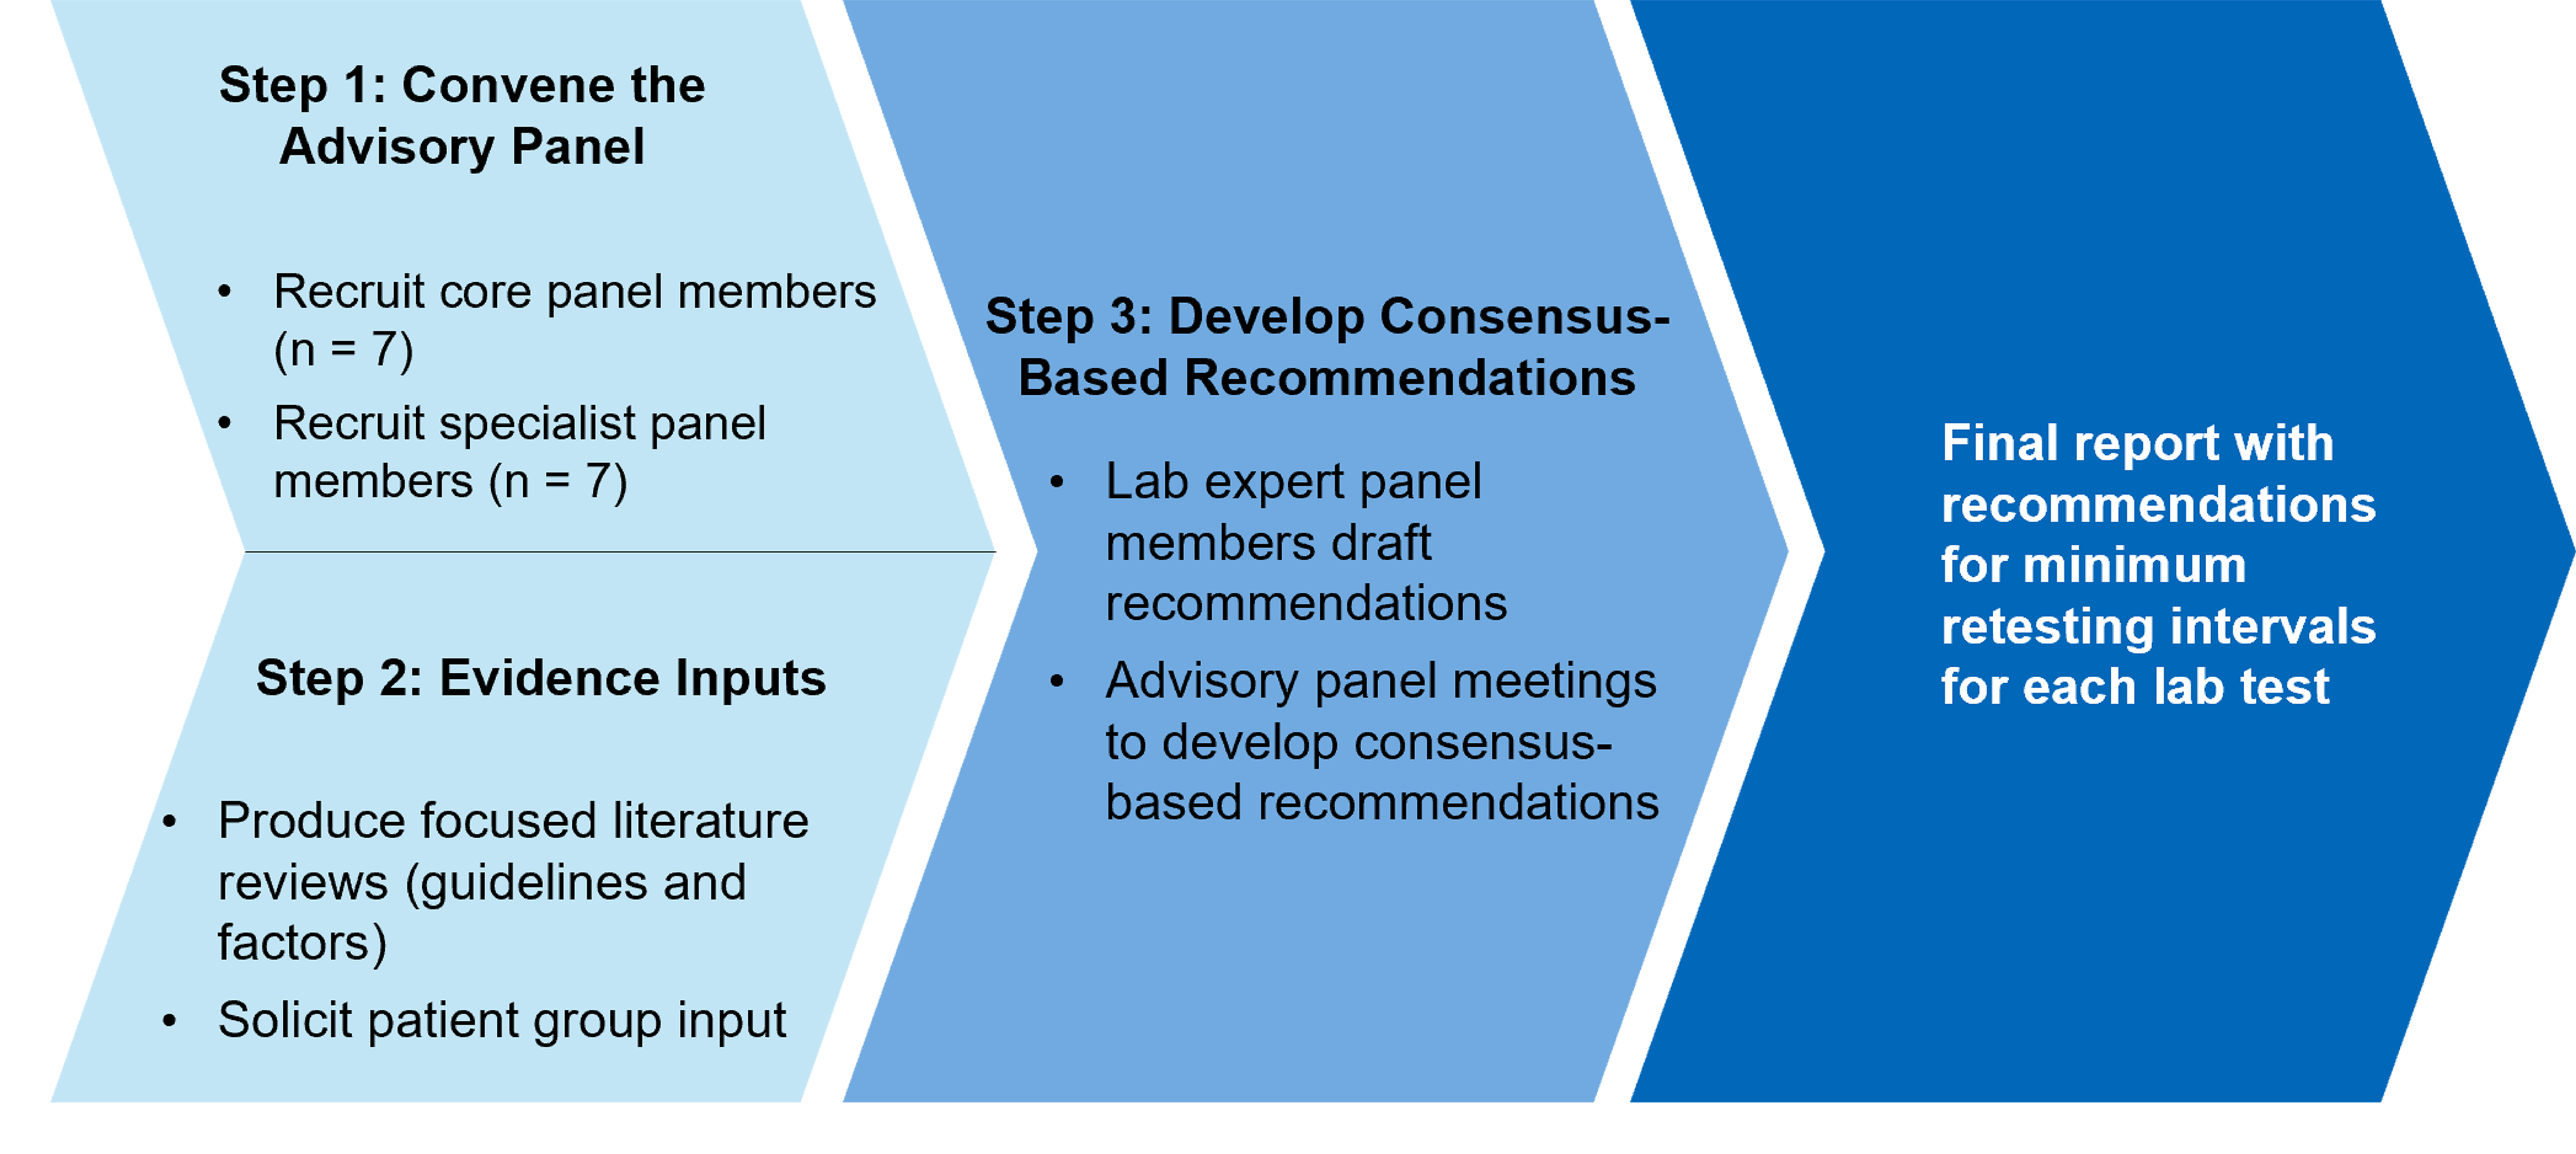 Flow diagram of the approach used to develop the consensus-based recommendations. Three large linear arrows denote the steps of the process. The first arrow includes step 1 and step 2, which occurred concurrently. The second arrow represents step 3 and the third arrow represents the final report with recommendations.